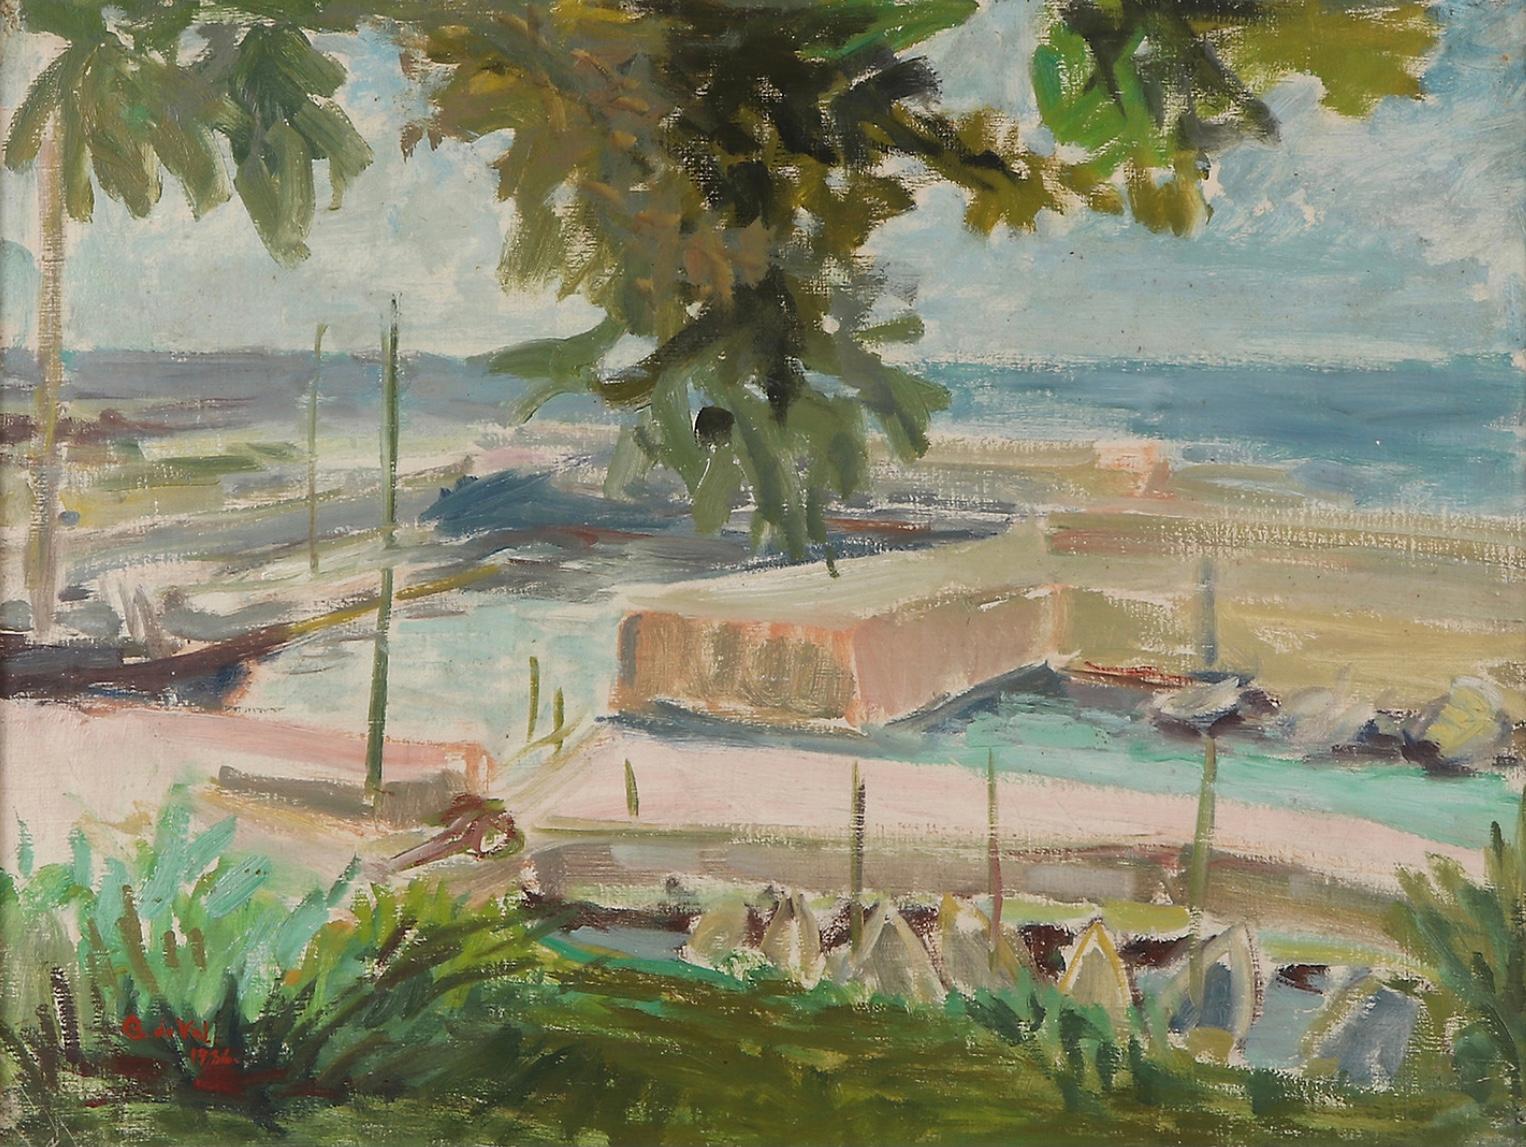 Charming framed oil on canvas of a french marina by Swedish artist Gertrude de Val dated 1936.
Painted mainly in tones of blue and green the view is out to the marina with the sea beyond from under the leafy shade of an olive tree.
The artist